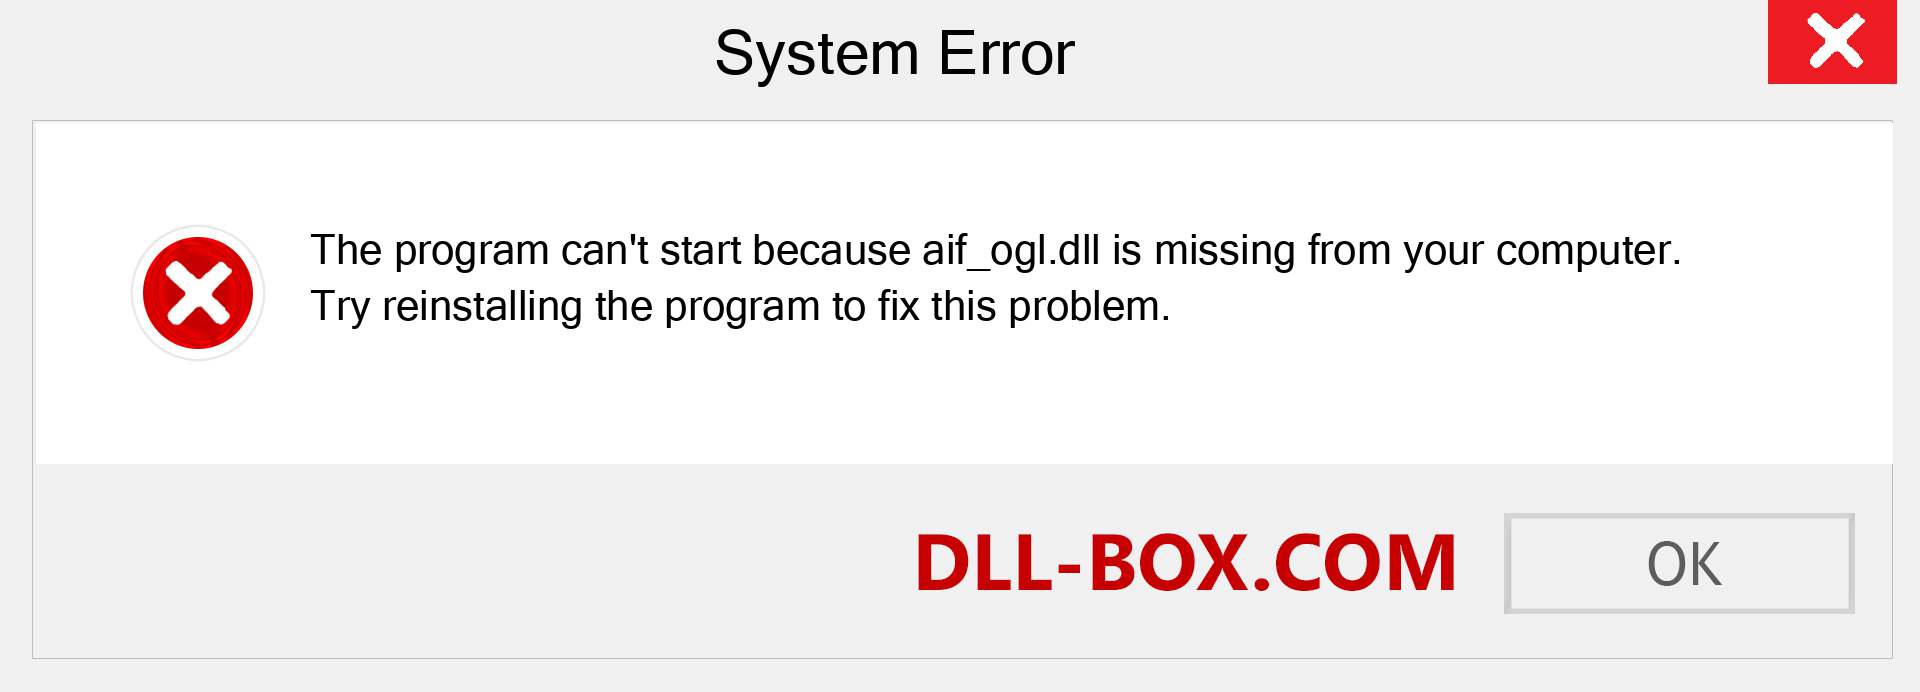  aif_ogl.dll file is missing?. Download for Windows 7, 8, 10 - Fix  aif_ogl dll Missing Error on Windows, photos, images